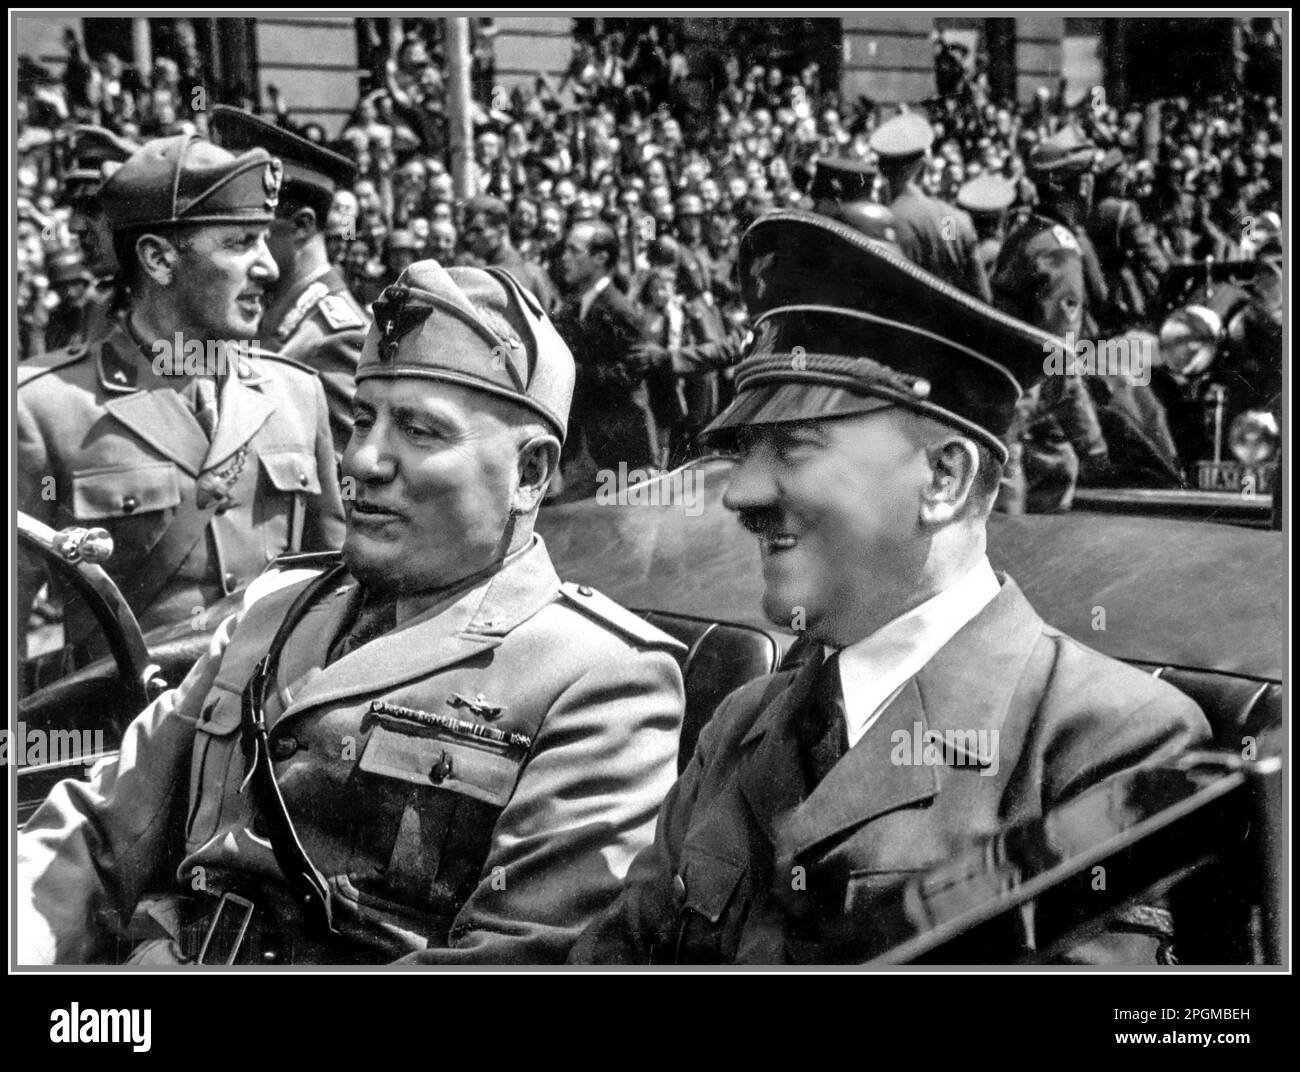 Fuhrer Adolf Hitler and Benito Mussolini el Duce in Munich Nazi Germany in an open top Mercedes Motor car.  Hitler and Mussolini in Munich, Germany, ca.  June 1940.  Eva Braun Album Collection. Axis Leaders WW2 World War II Second World War Stock Photo